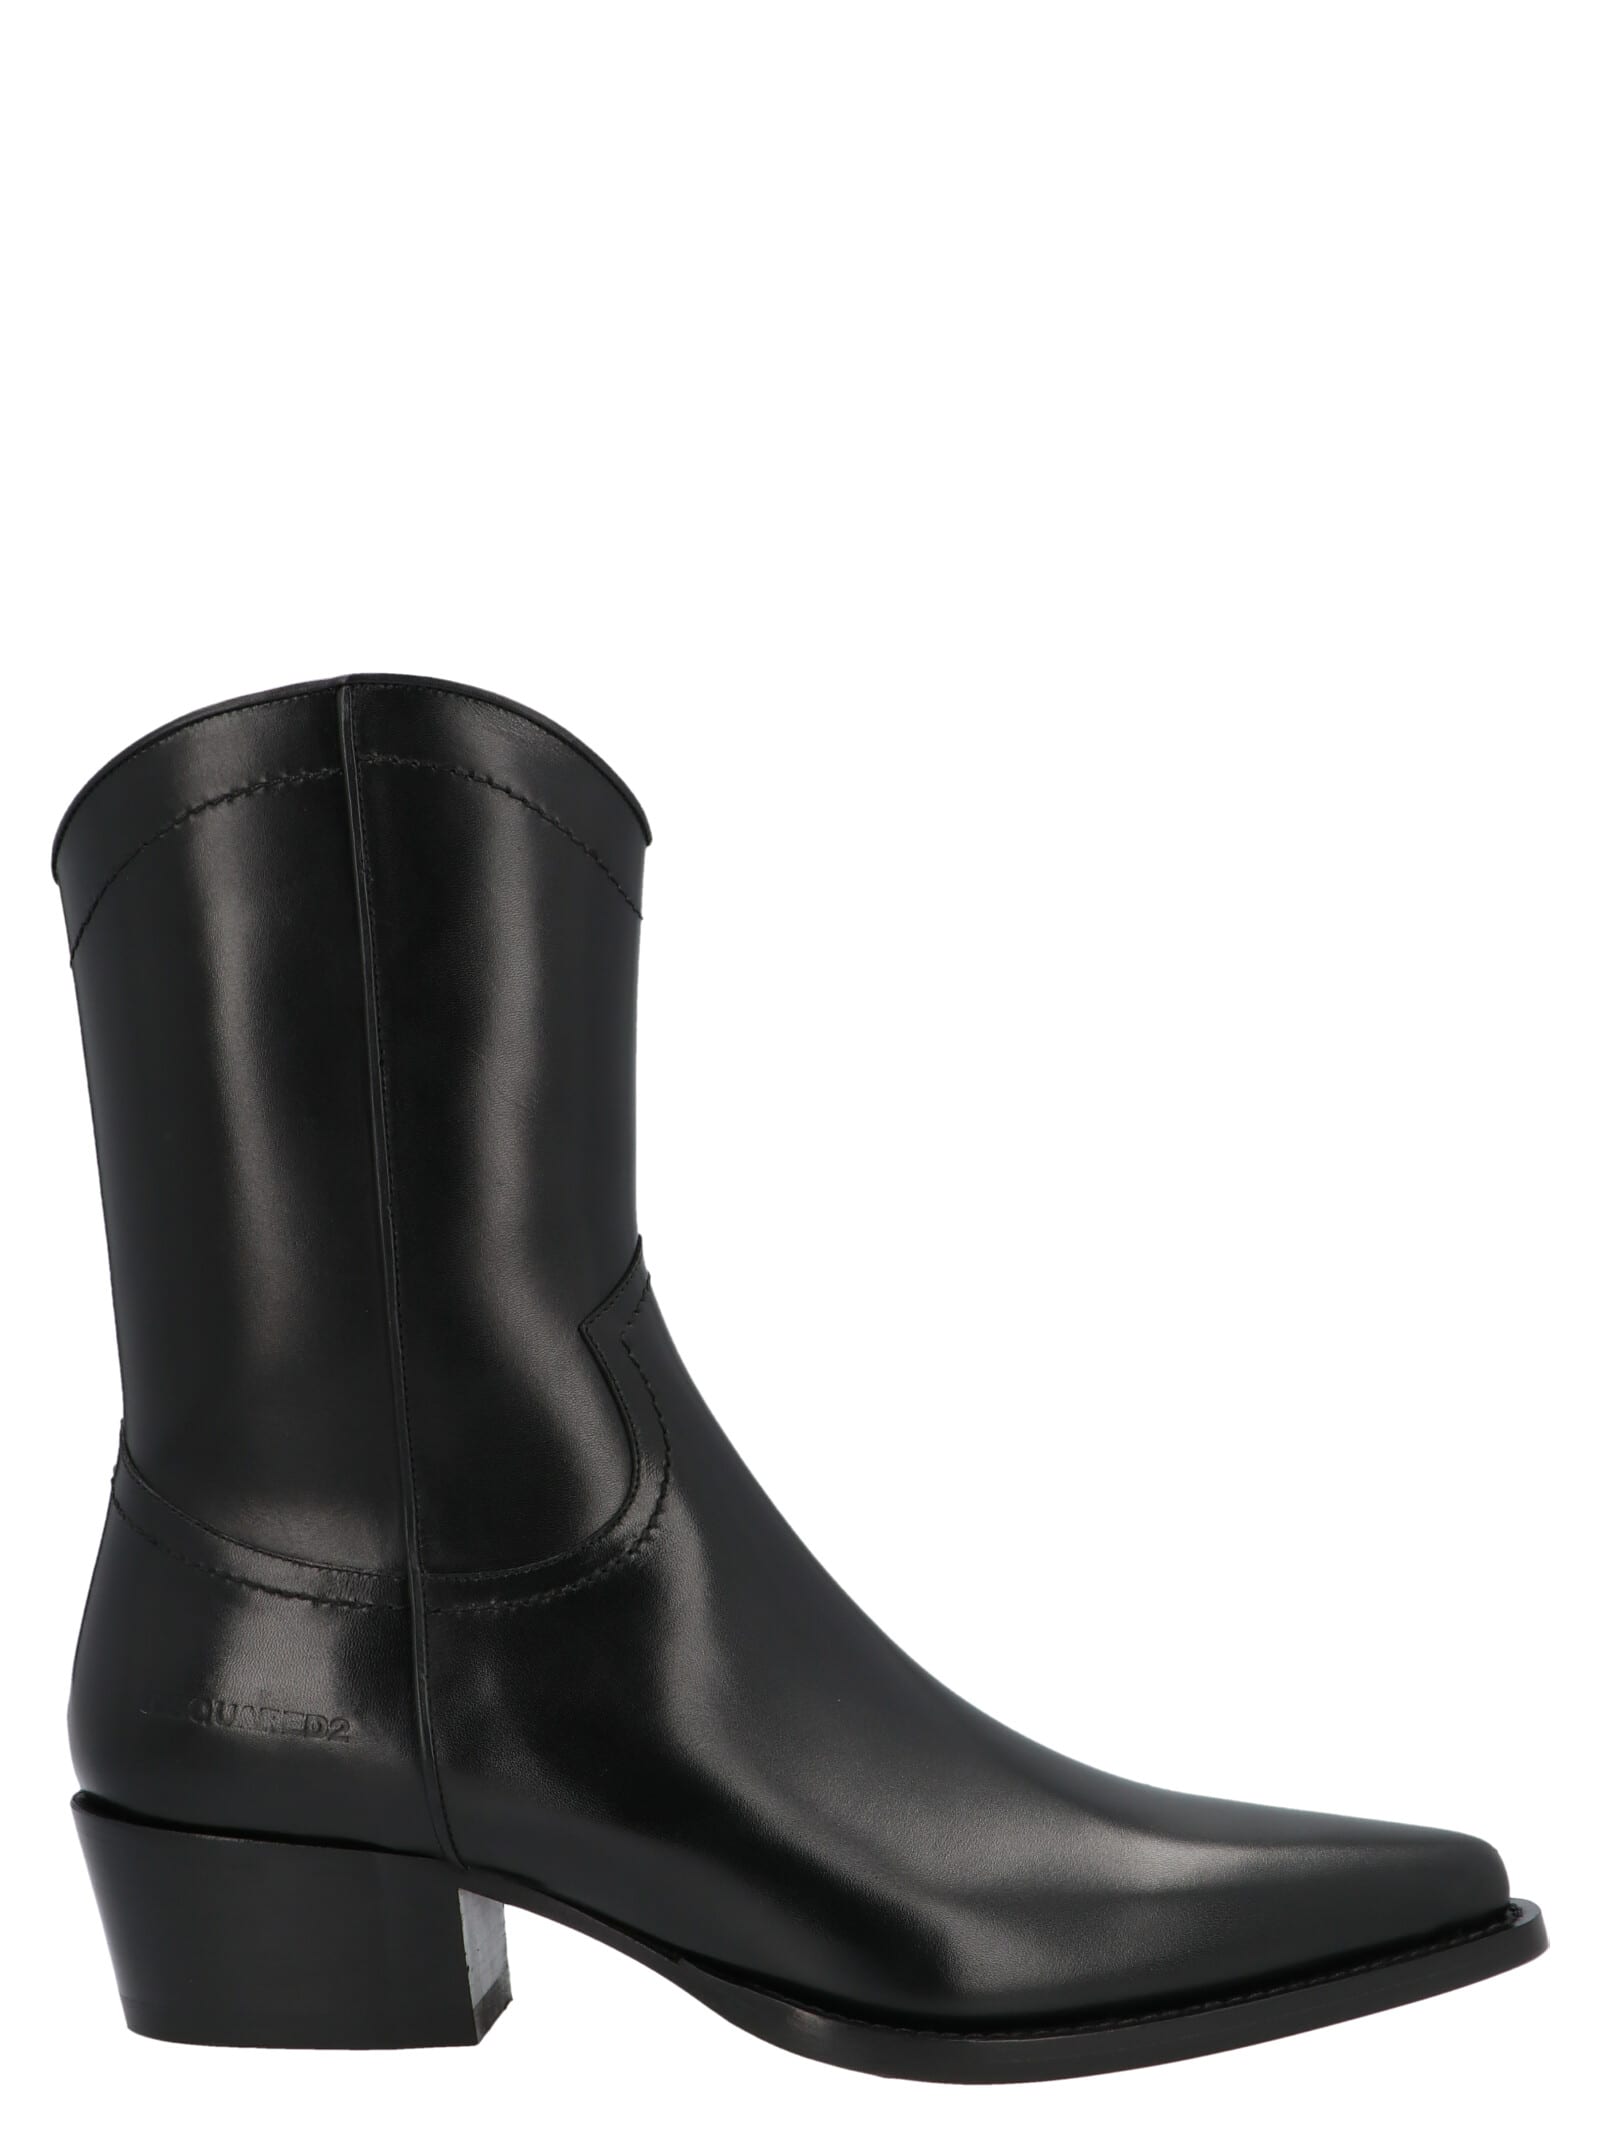 Dsquared2 Boots | italist, ALWAYS LIKE A SALE